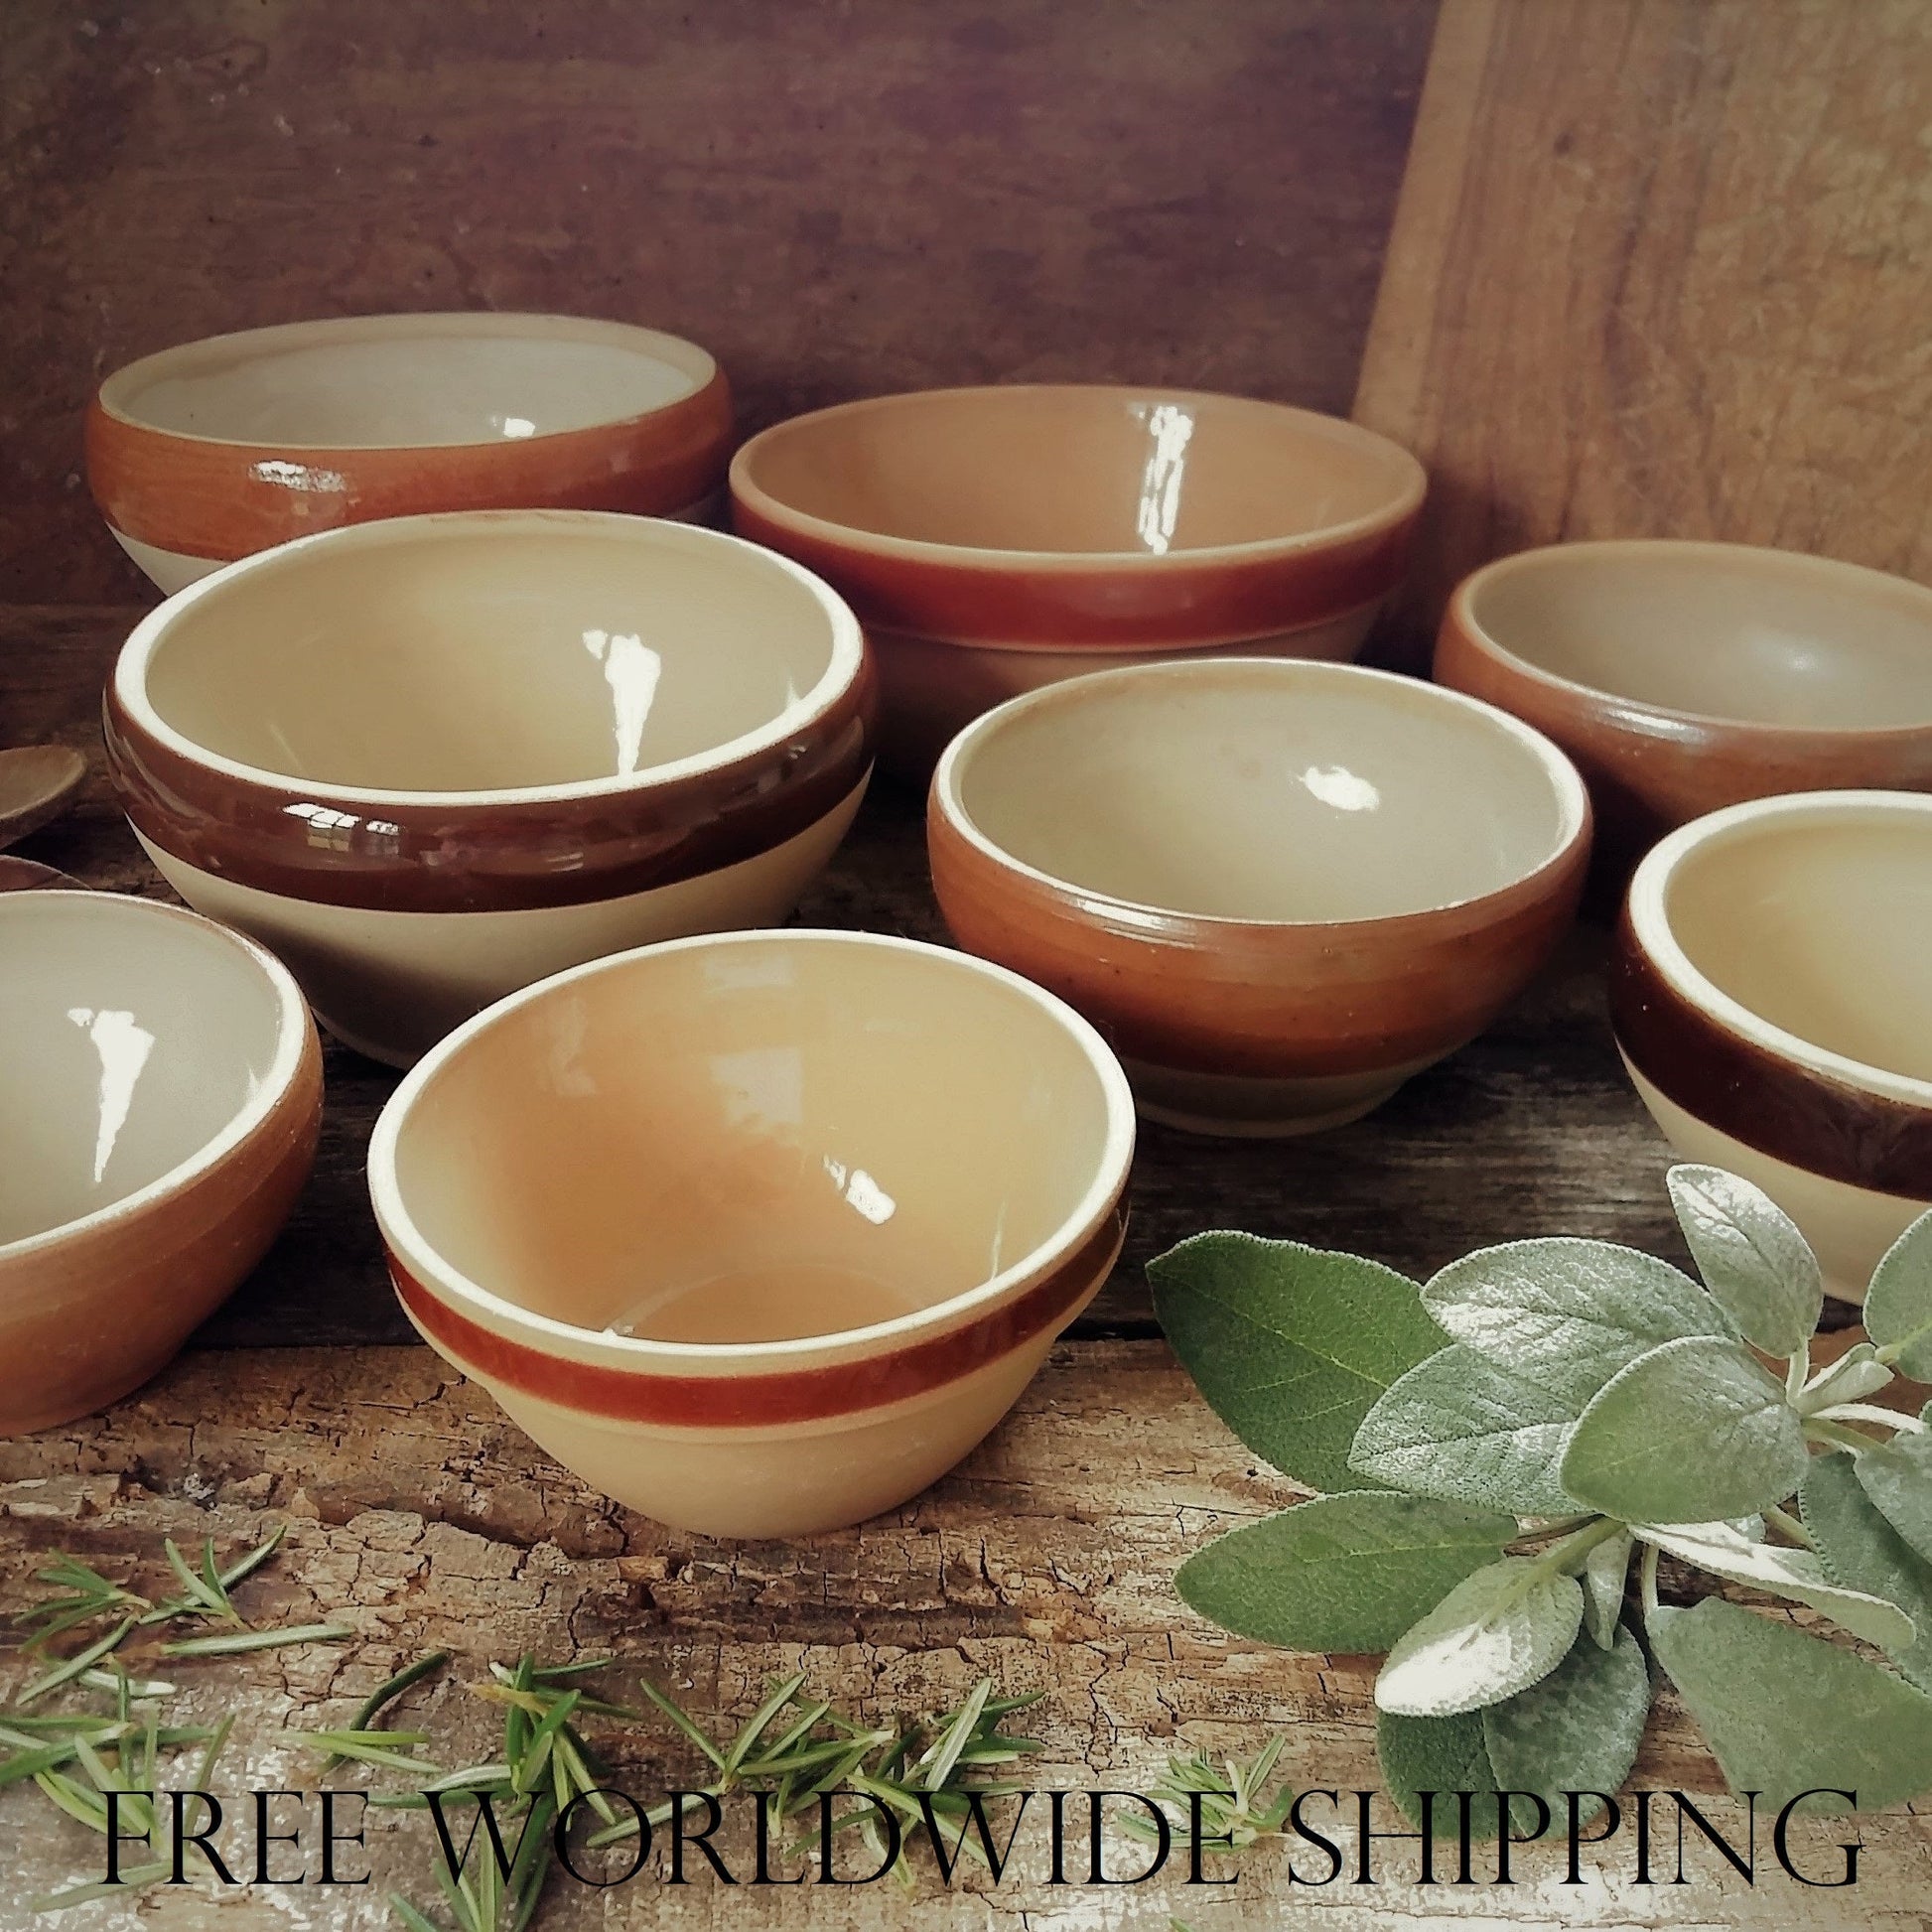 Set of EIGHT Confit Bowls from Tiggy & Pip - Just €168! Shop now at Tiggy and Pip